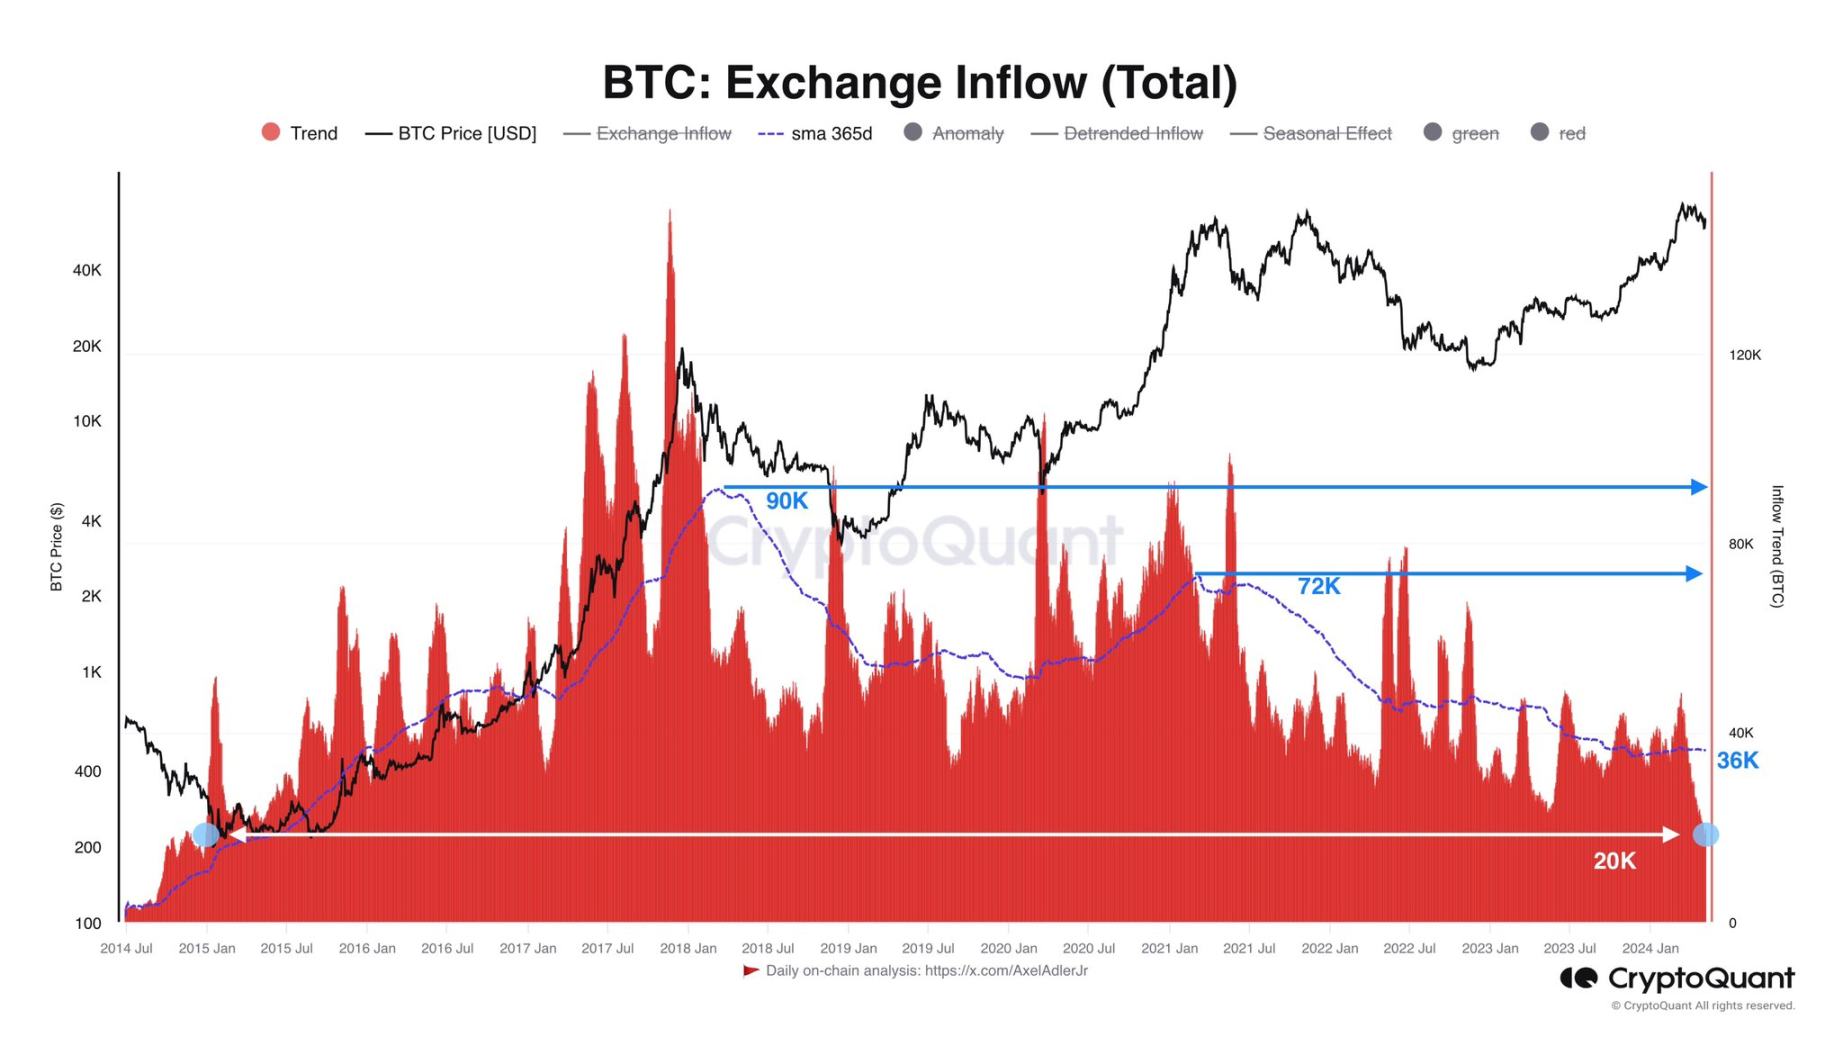 More and more people are hoarding coins, and the amount of BTC inflow to exchanges has dropped to the lowest level in nearly a decade